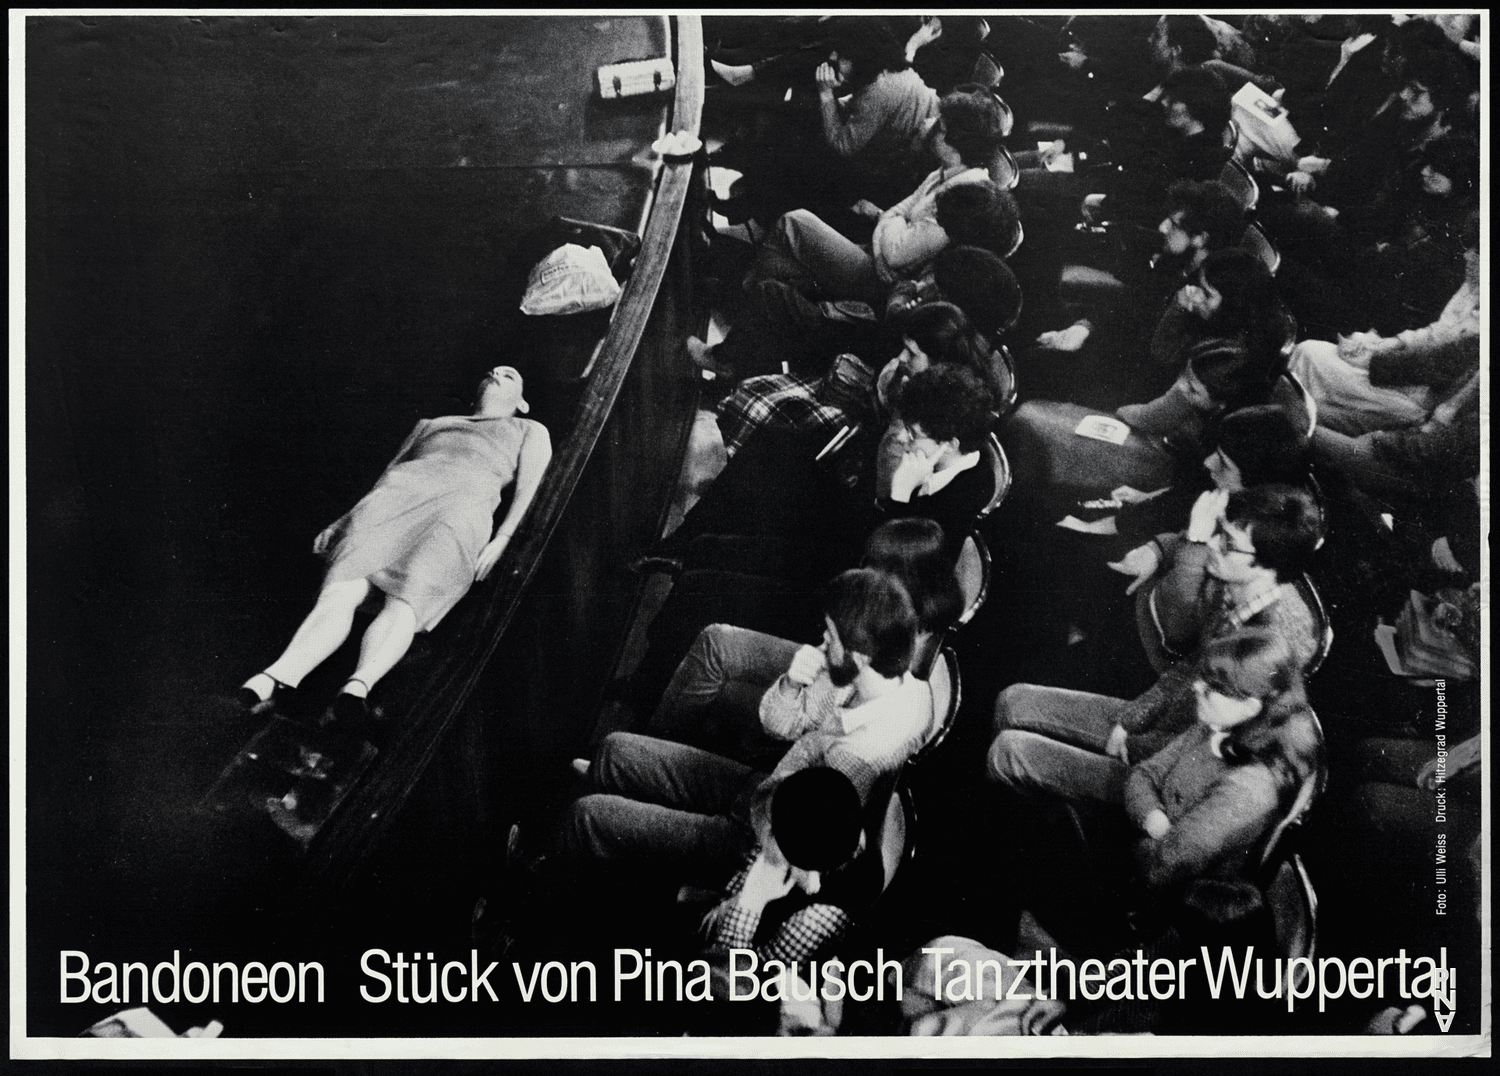 Poster for “Bandoneon” by Pina Bausch